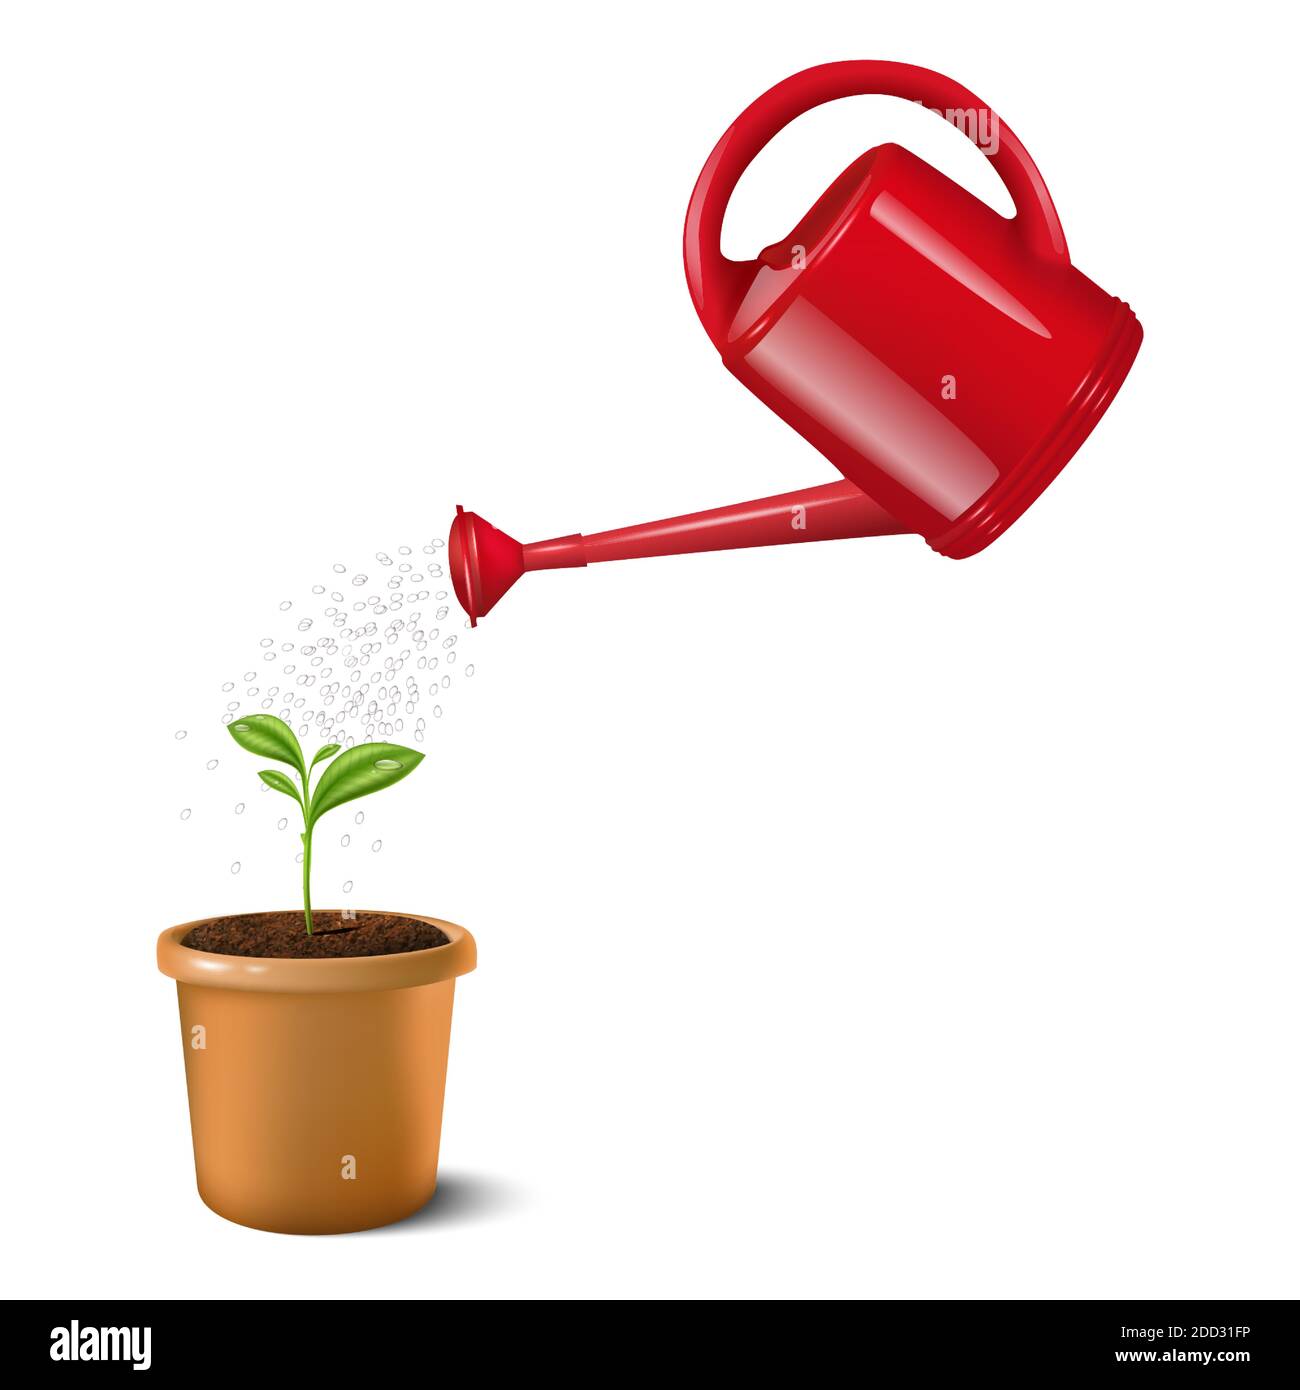 3d realistic vector icon illustration of red water can watering small green plant in a clay brown pot. Isolated on white background. Stock Vector